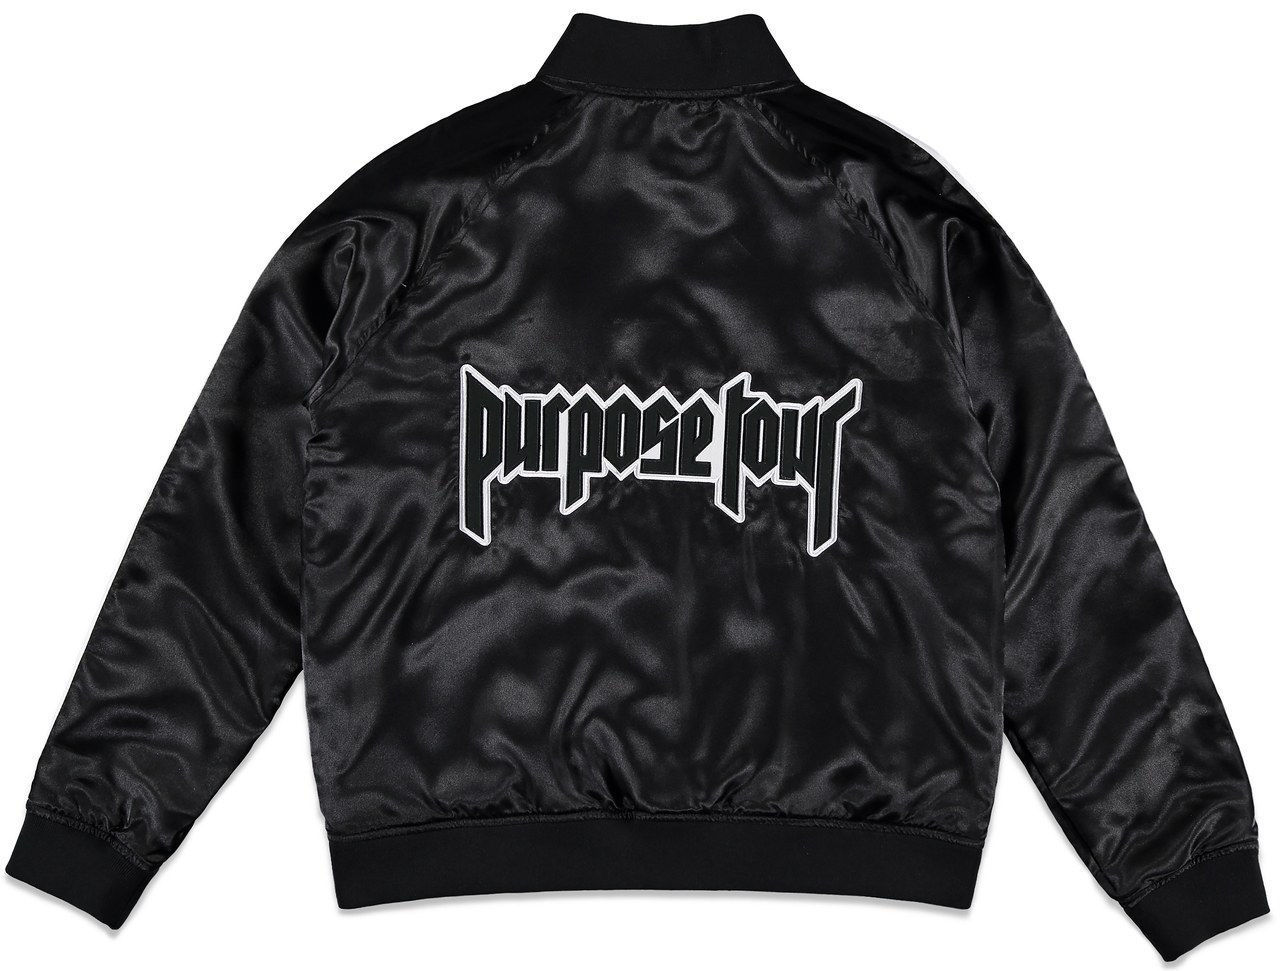 Bombardeo jacket, [$35](http://www.forever21.com/Product/Product.aspx?BR=f21&Category=promo-purpose-tour&ProductID=2000231268&VariantID=011)